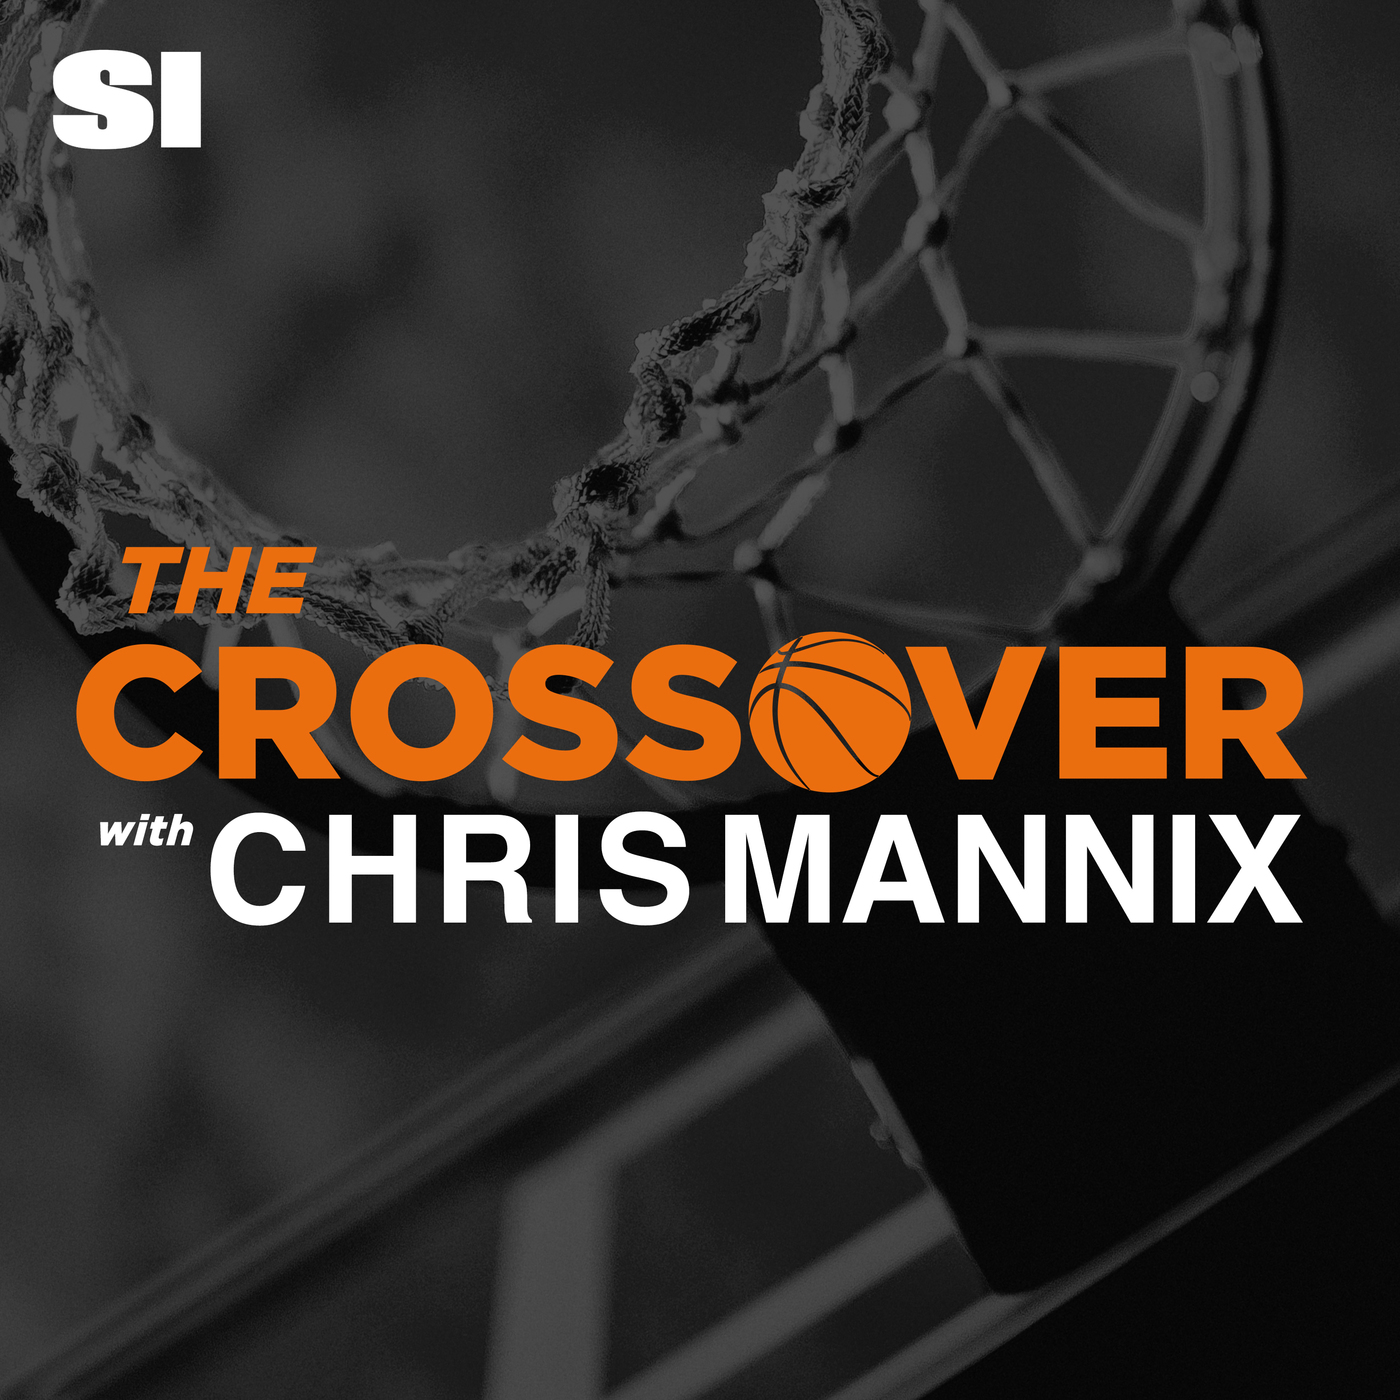 Fresh update on "headache" discussed on The Crossover NBA Show with Chris Mannix